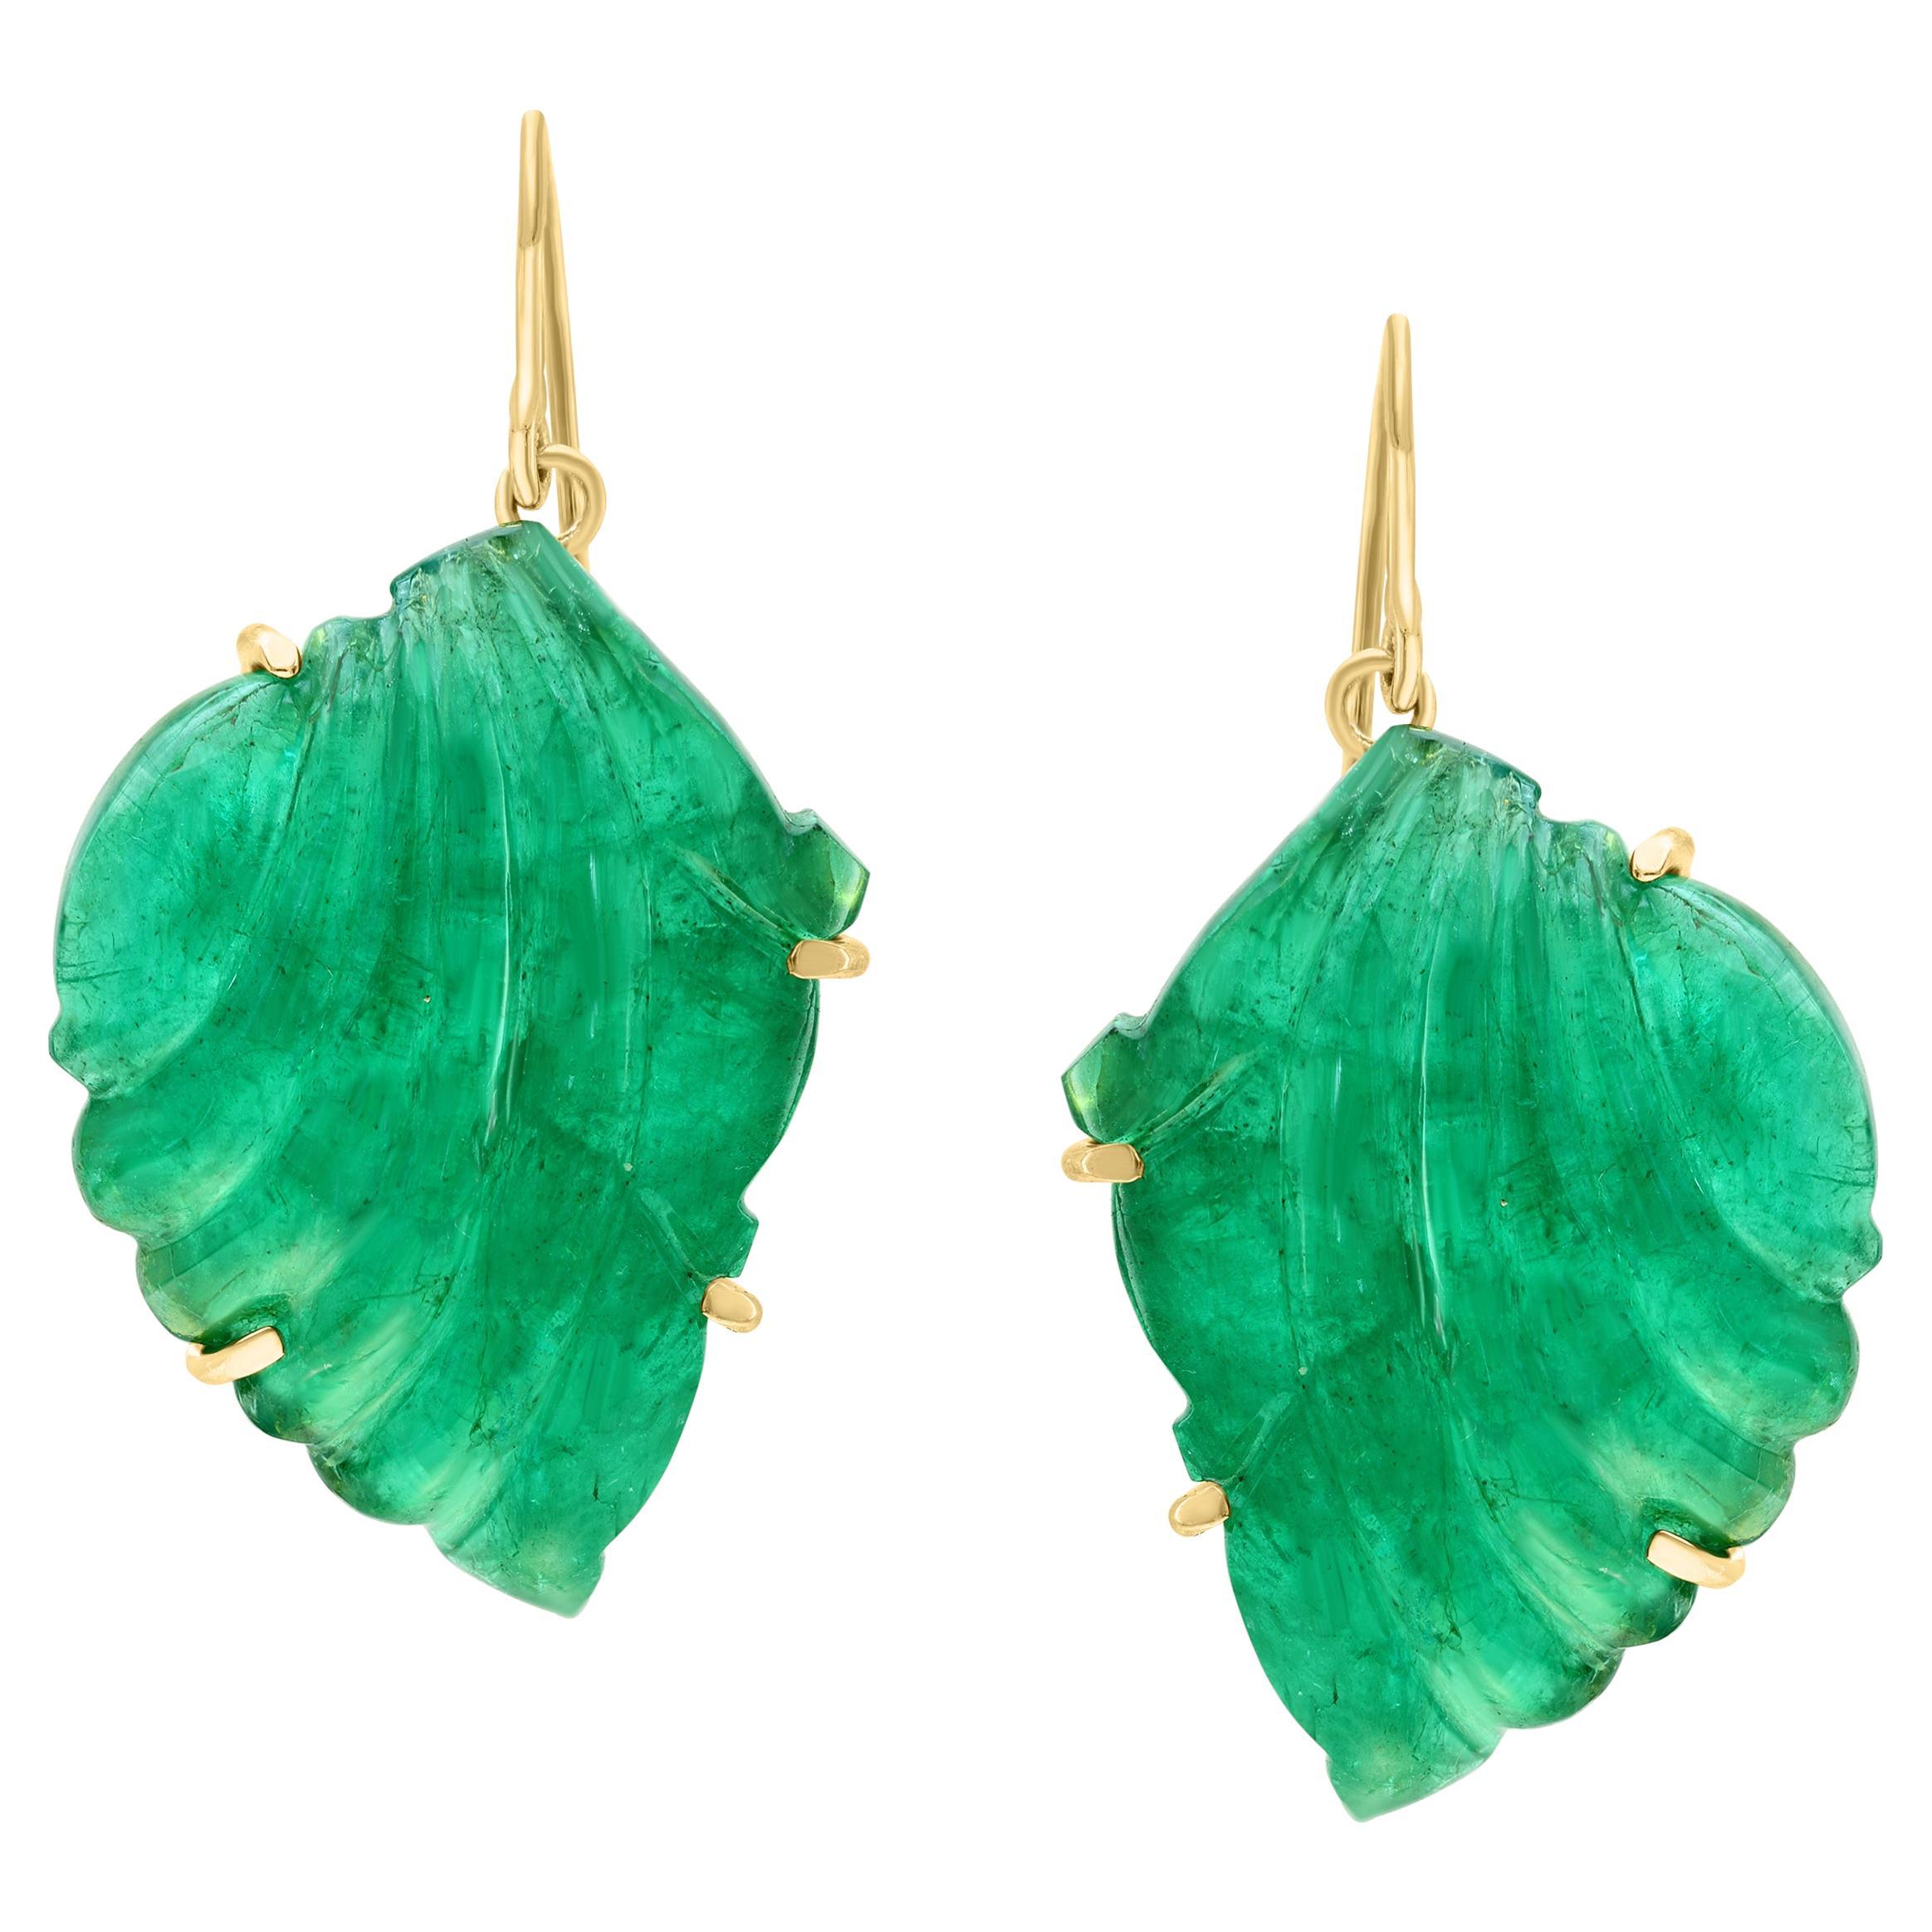 55 Ct Carved Emerald Leaf Shape Earrings 14 Kt Yellow Gold French Wire Earring For Sale